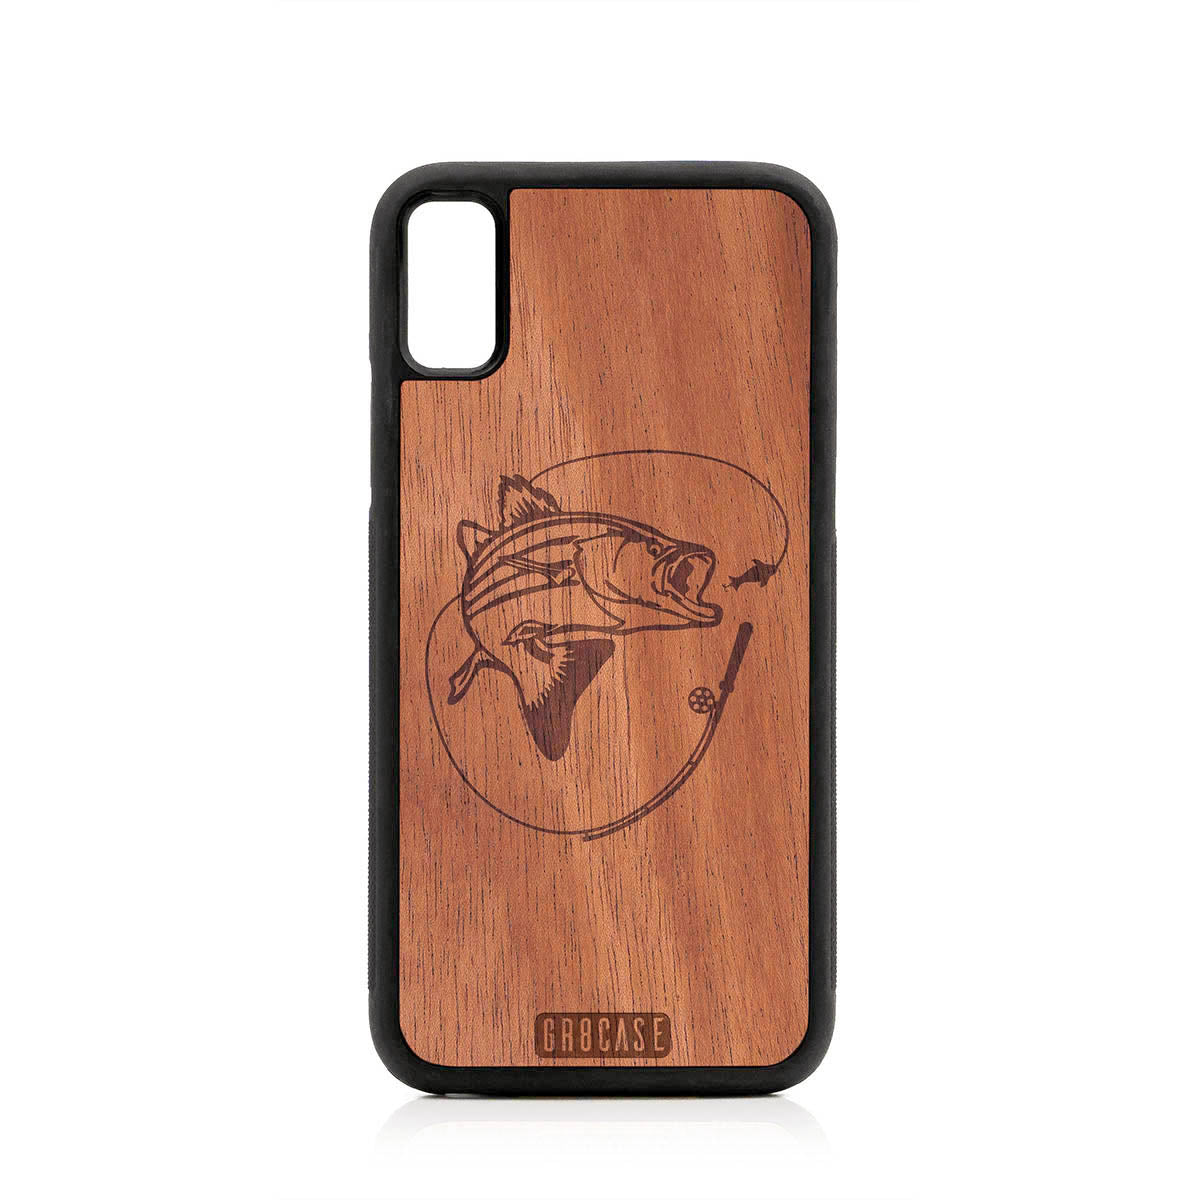 Fish and Reel Design Wood Case For iPhone XR by GR8CASE